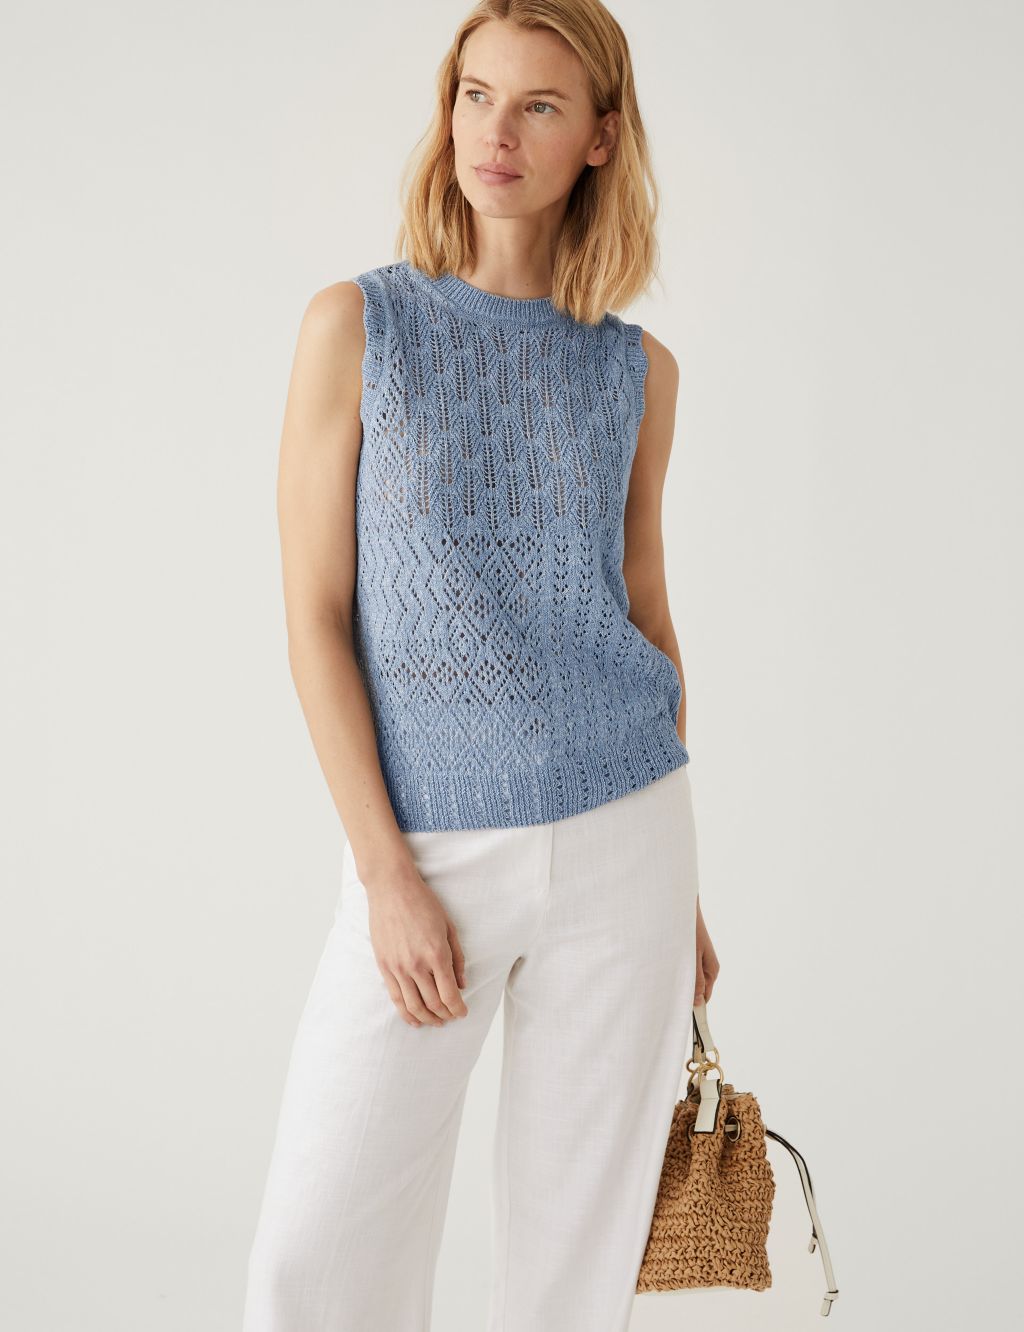 Cotton Rich Textured Knitted Vest image 1